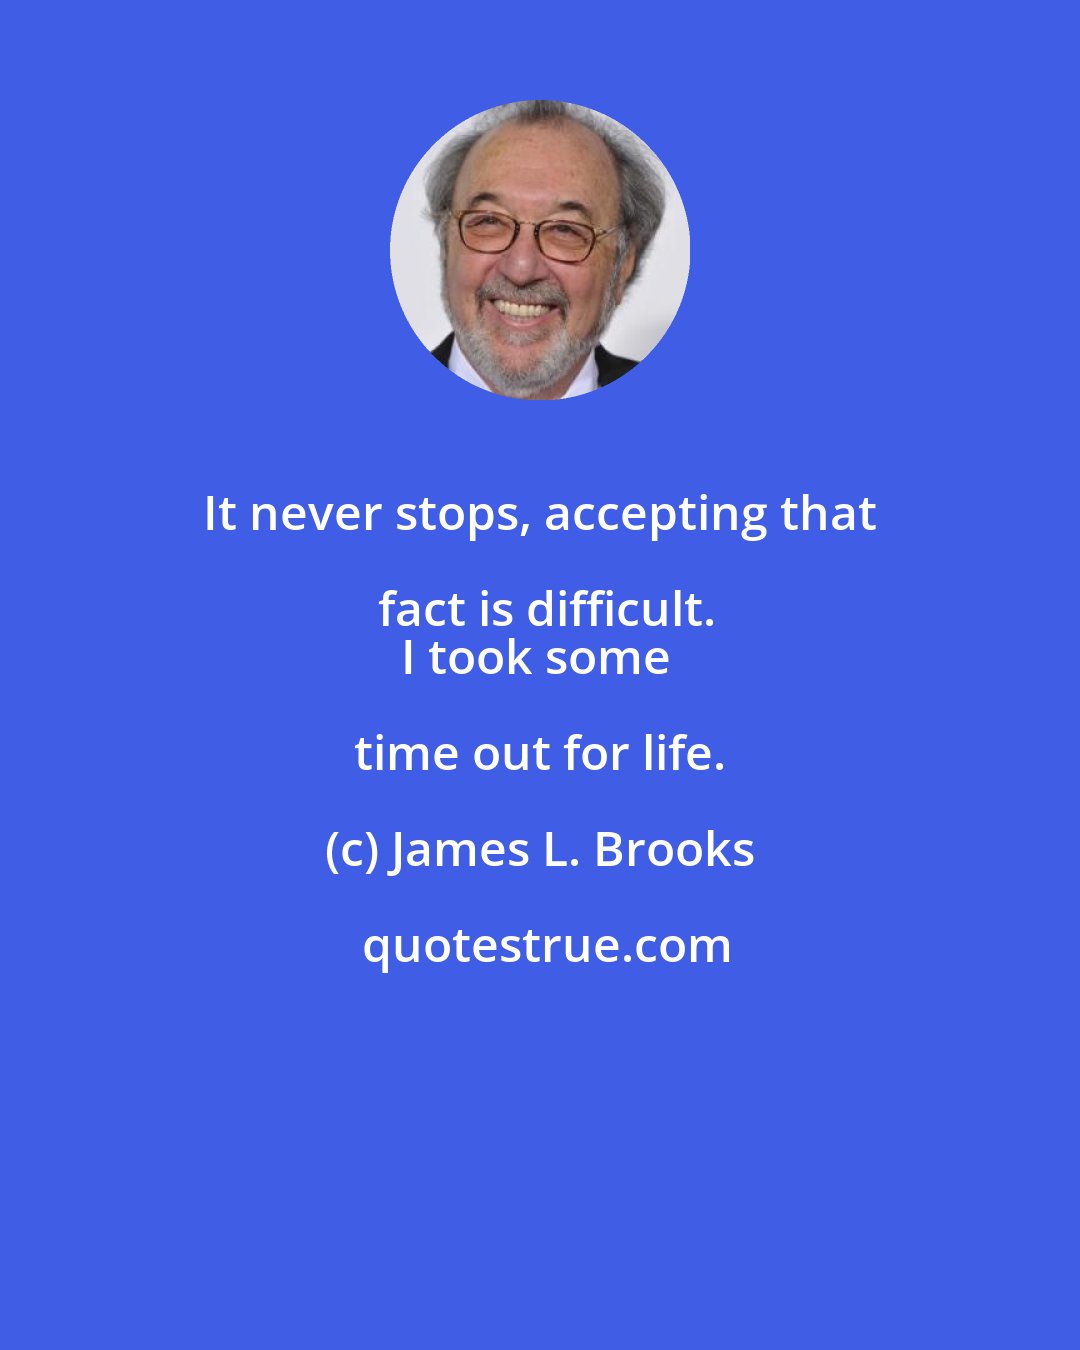 James L. Brooks: It never stops, accepting that fact is difficult.
I took some time out for life.